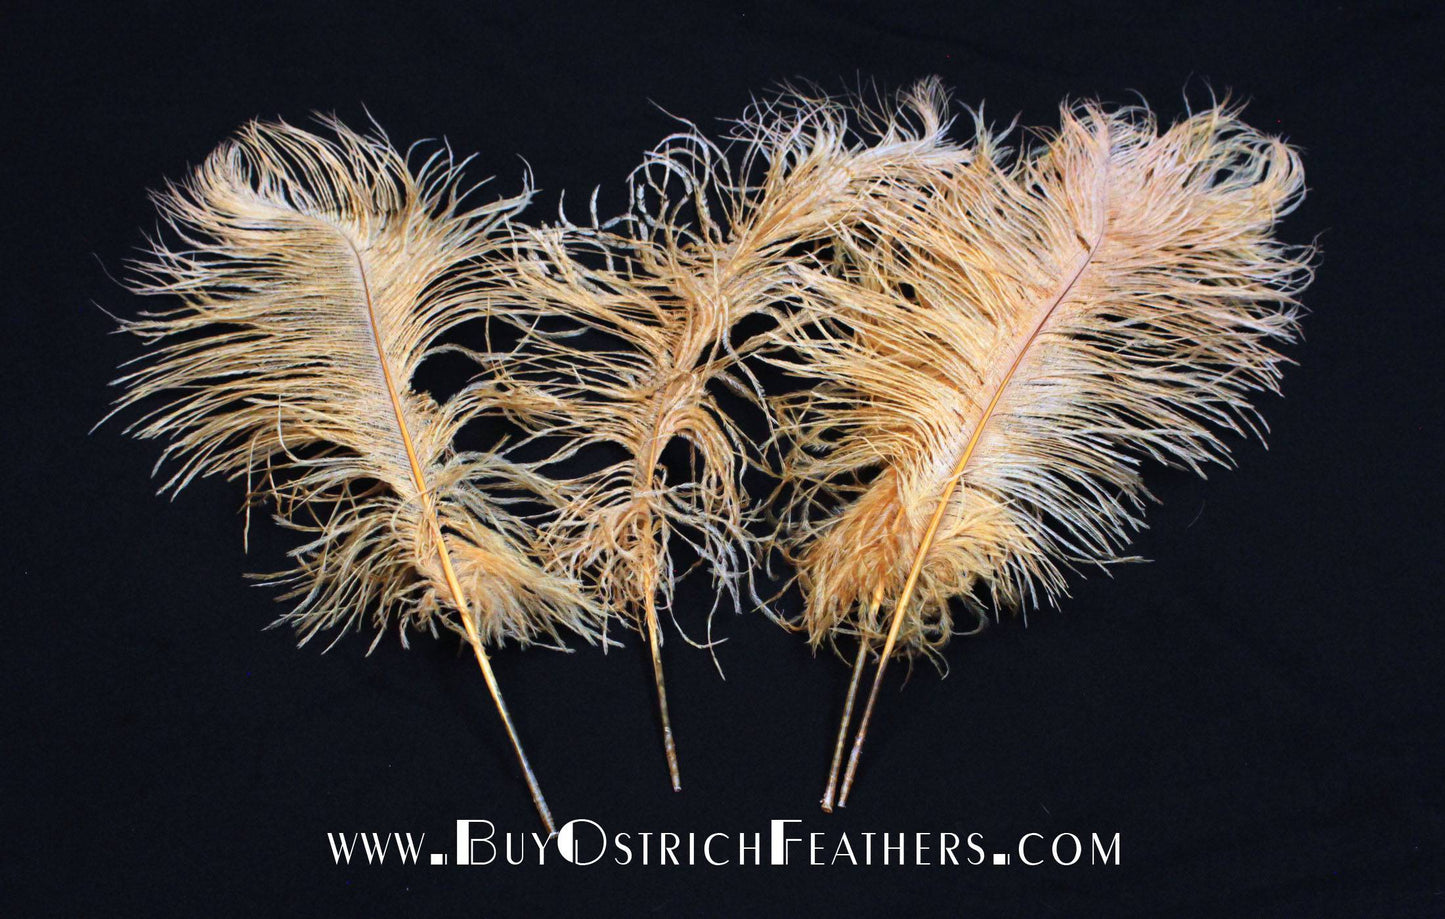 BULK 1/2lb Ostrich Feather Tail Plumes 15-20 (Fuchsia) for Sale Online